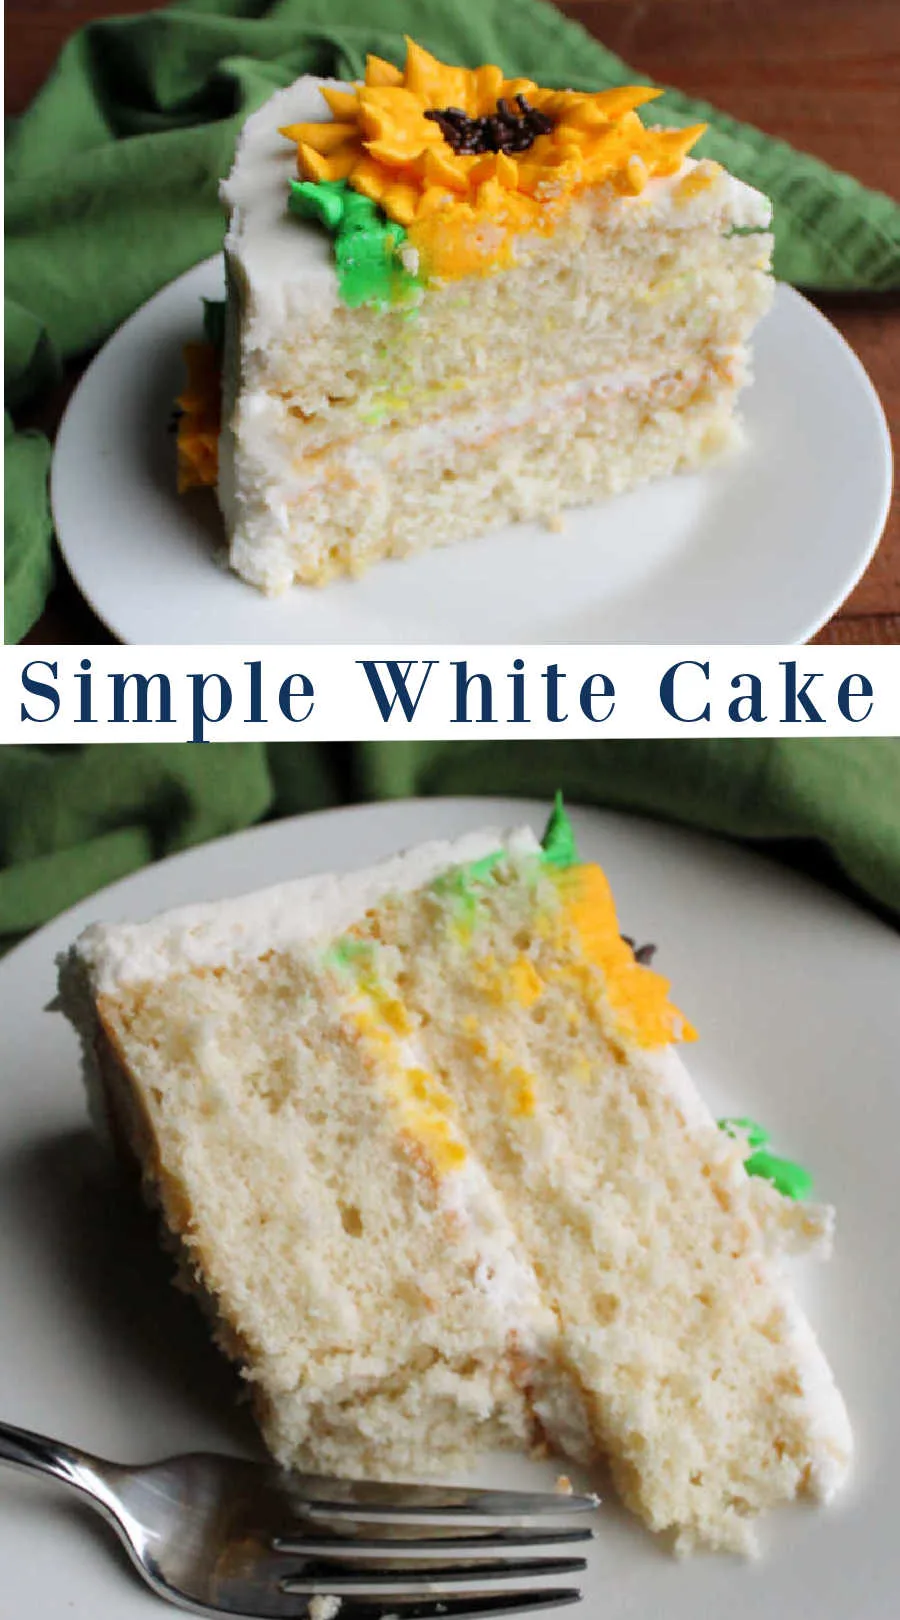 This recipe makes whipping up a tender white cake from scratch super easy.  It is perfect for birthdays and celebrations! 